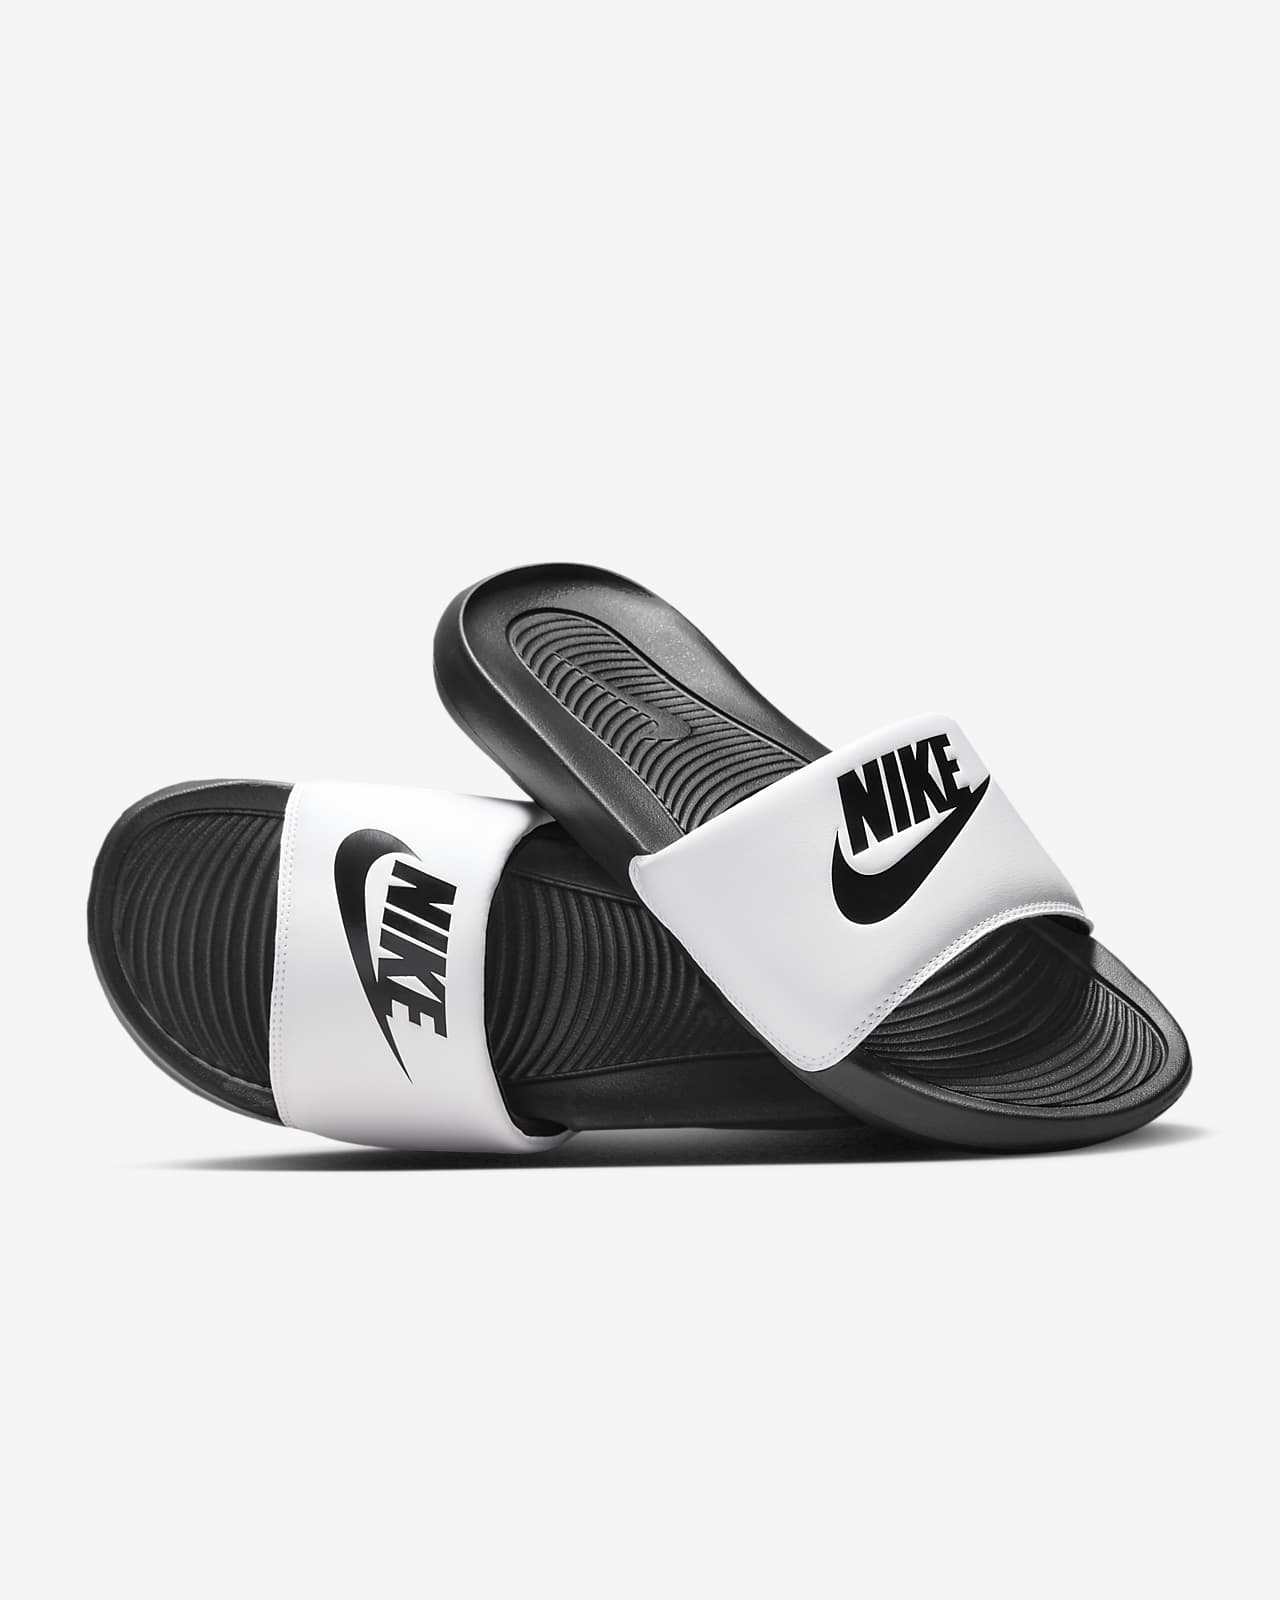 nike ones black and white